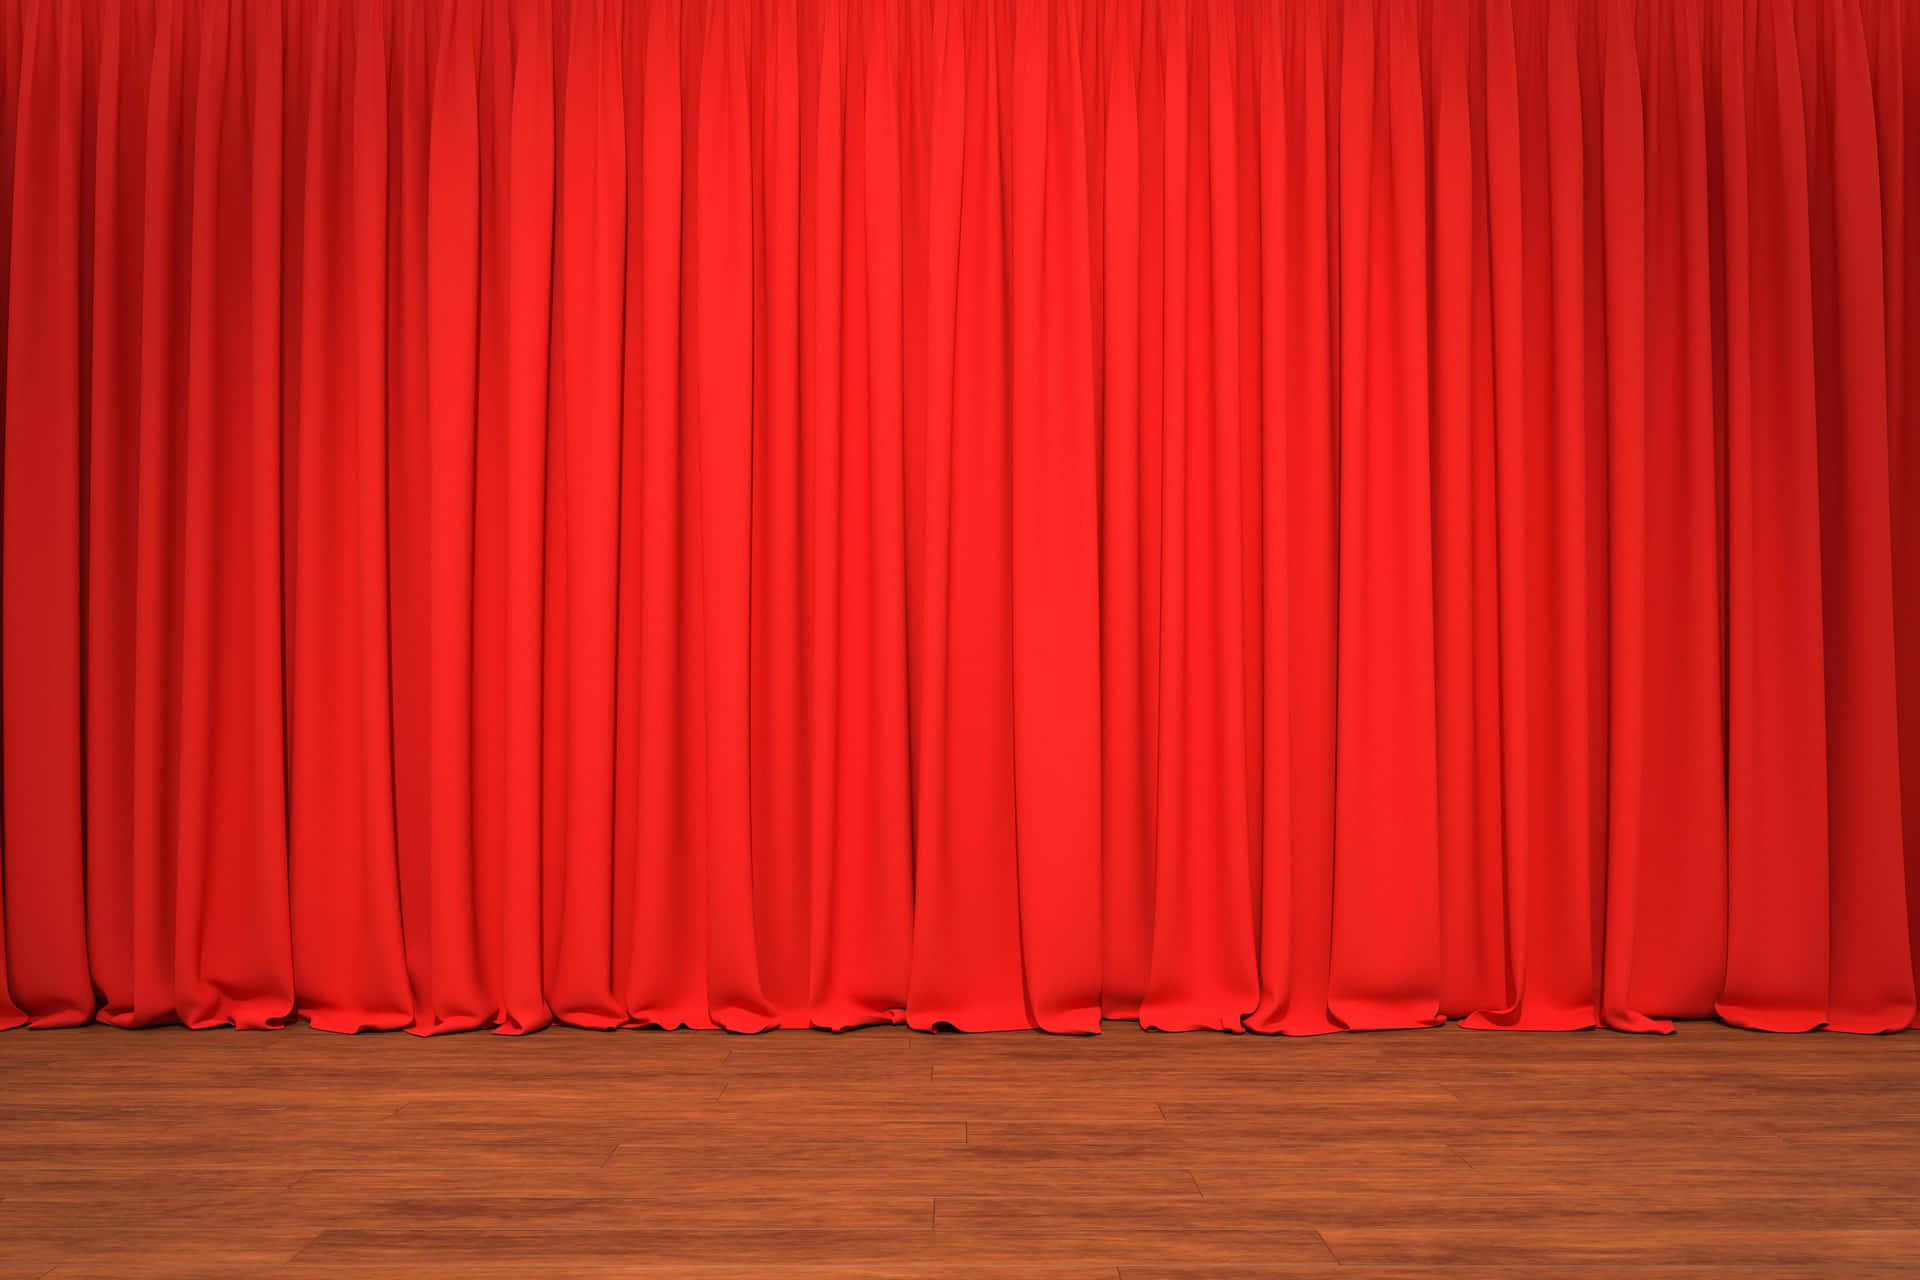 Red Curtain On A Wooden Floor